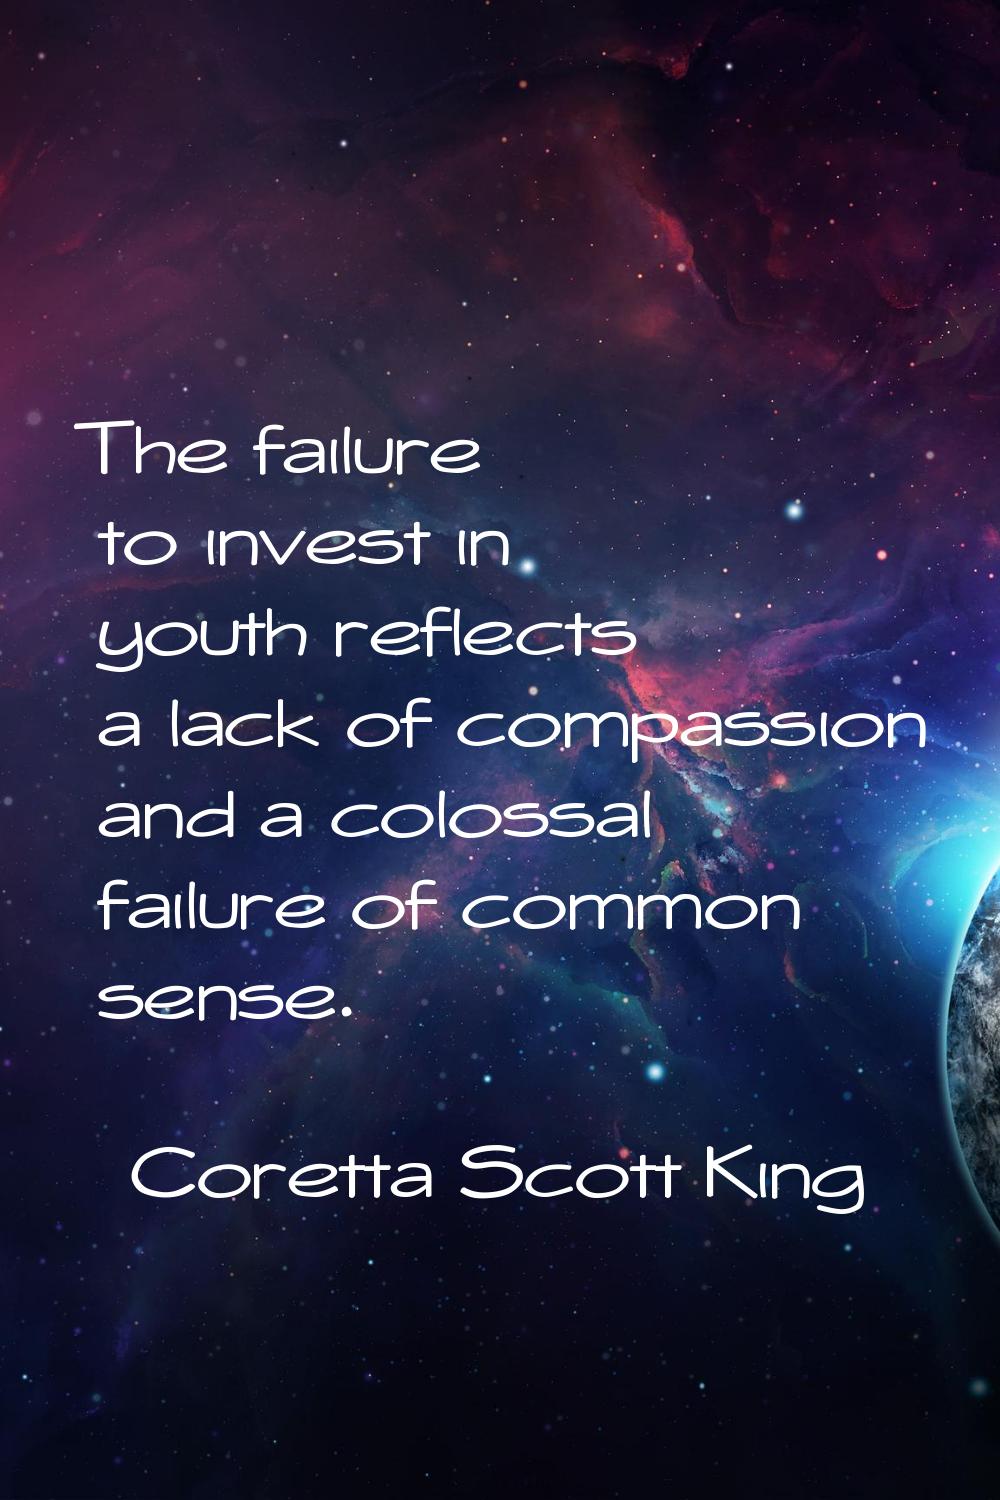 The failure to invest in youth reflects a lack of compassion and a colossal failure of common sense